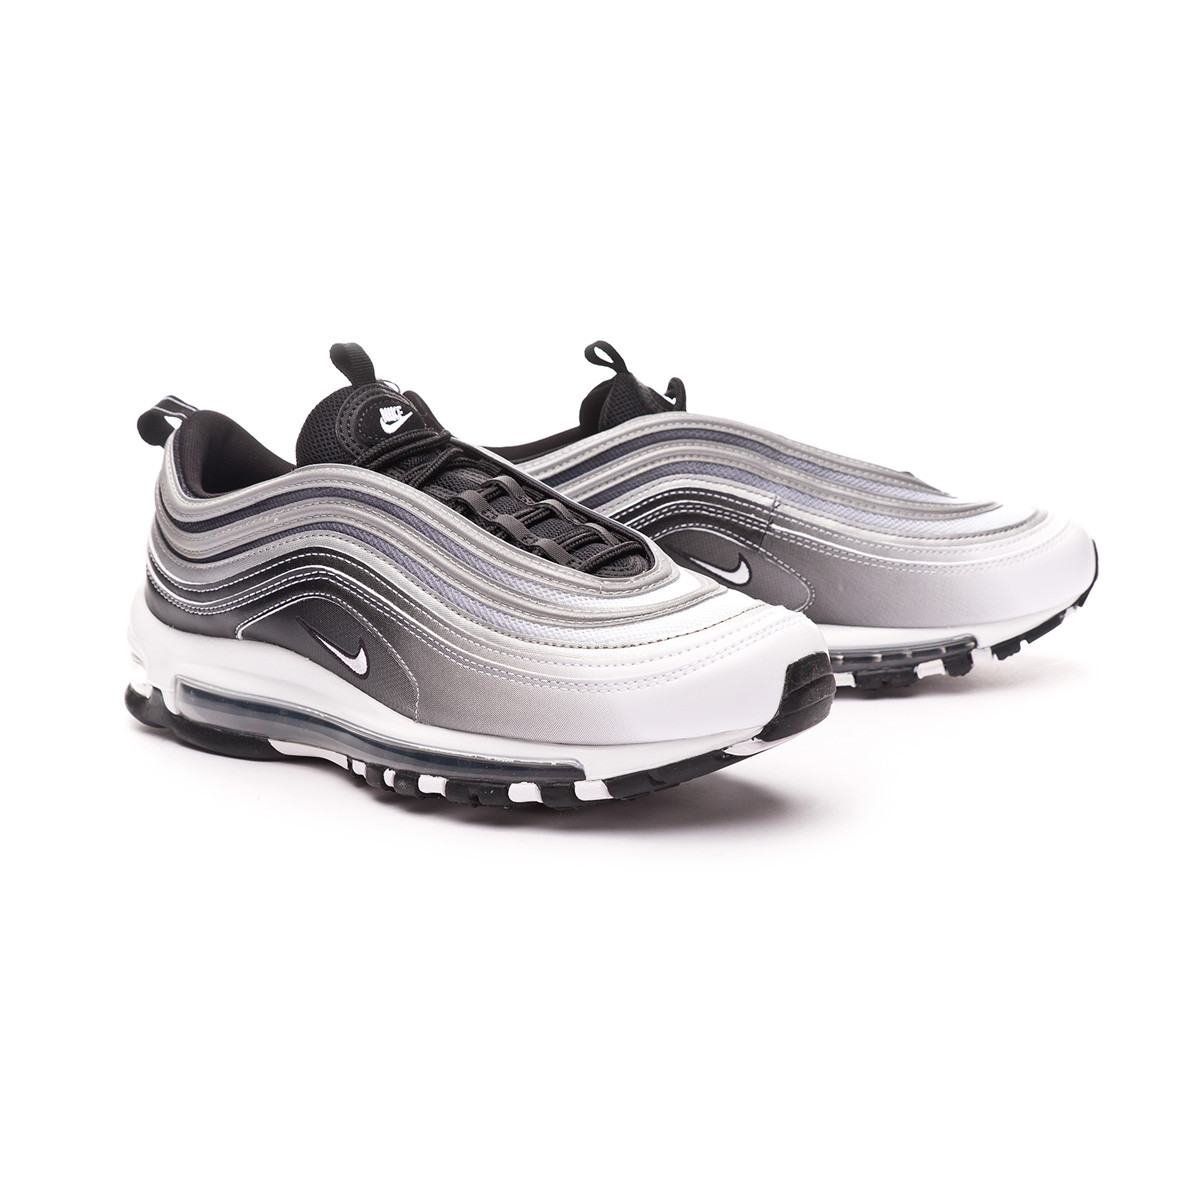 Air Max 97 Vapormax Fusion Notable Sneaker Releases